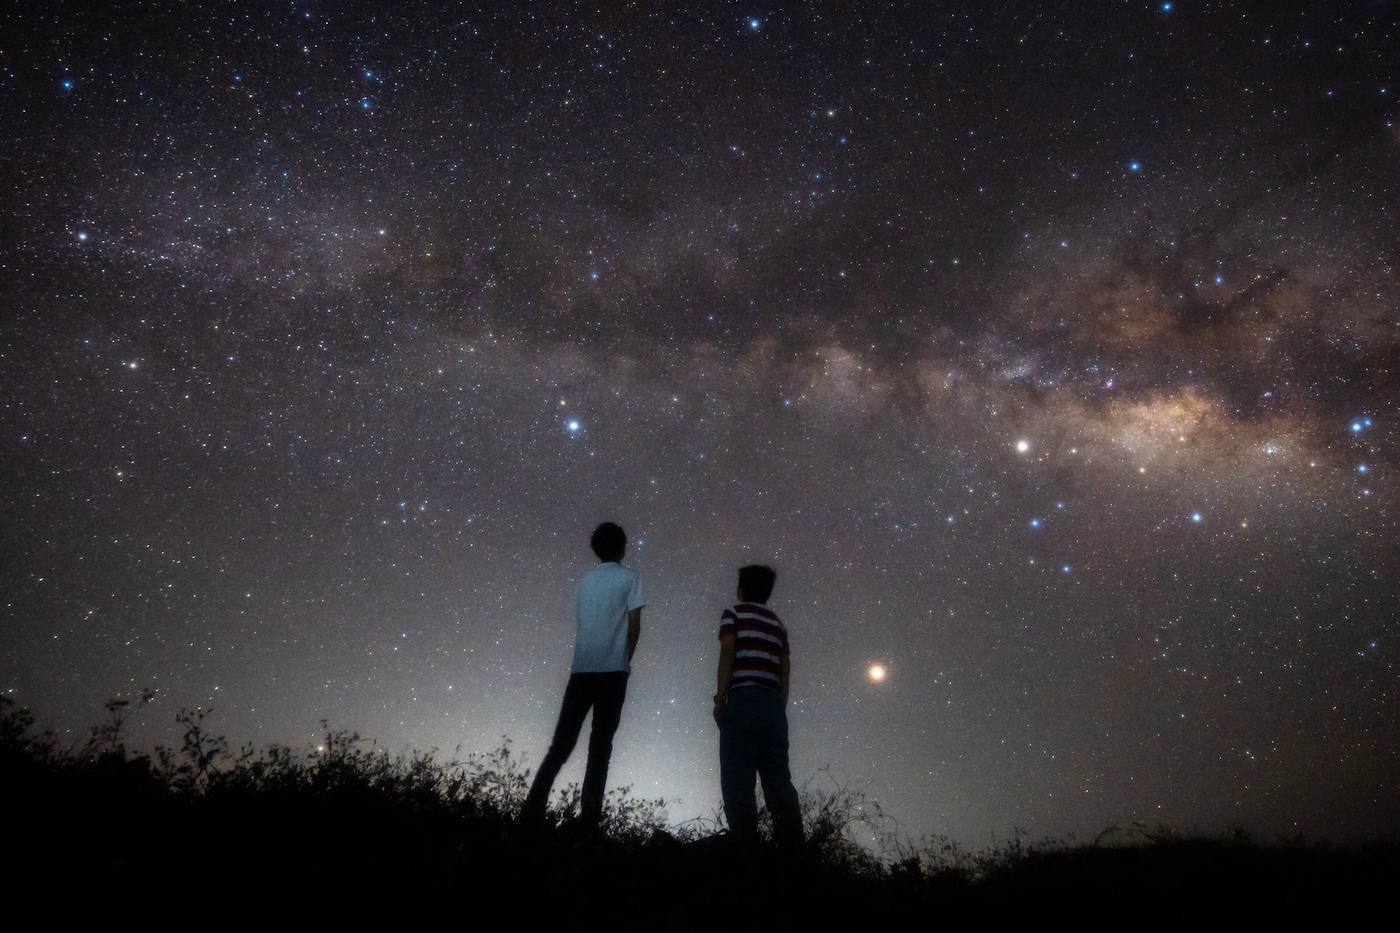 Here's the place to enjoy starry skies in Okinawa! Japan's first 'Dark Sky Park' is full of charm image